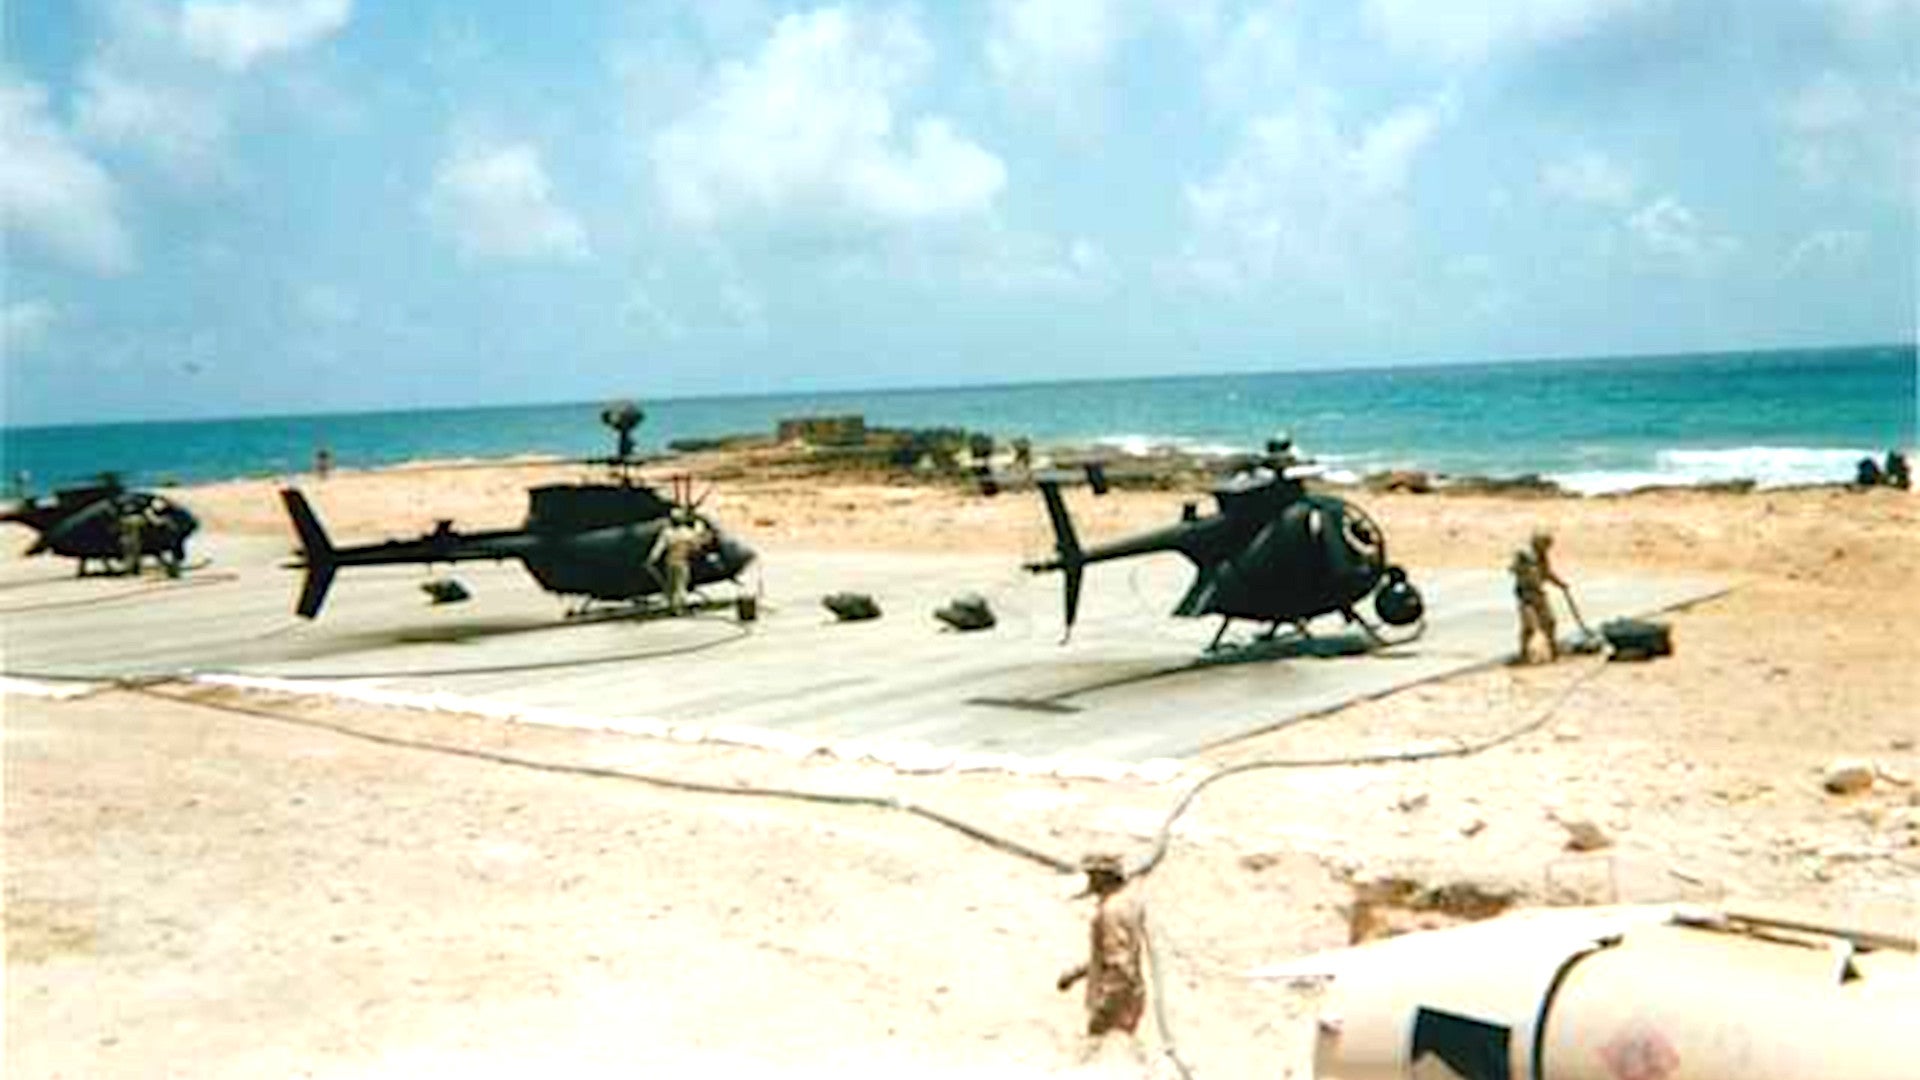 These Secret Helicopters Were Flown By A Shadowy Unit During The Battle of Mogadishu